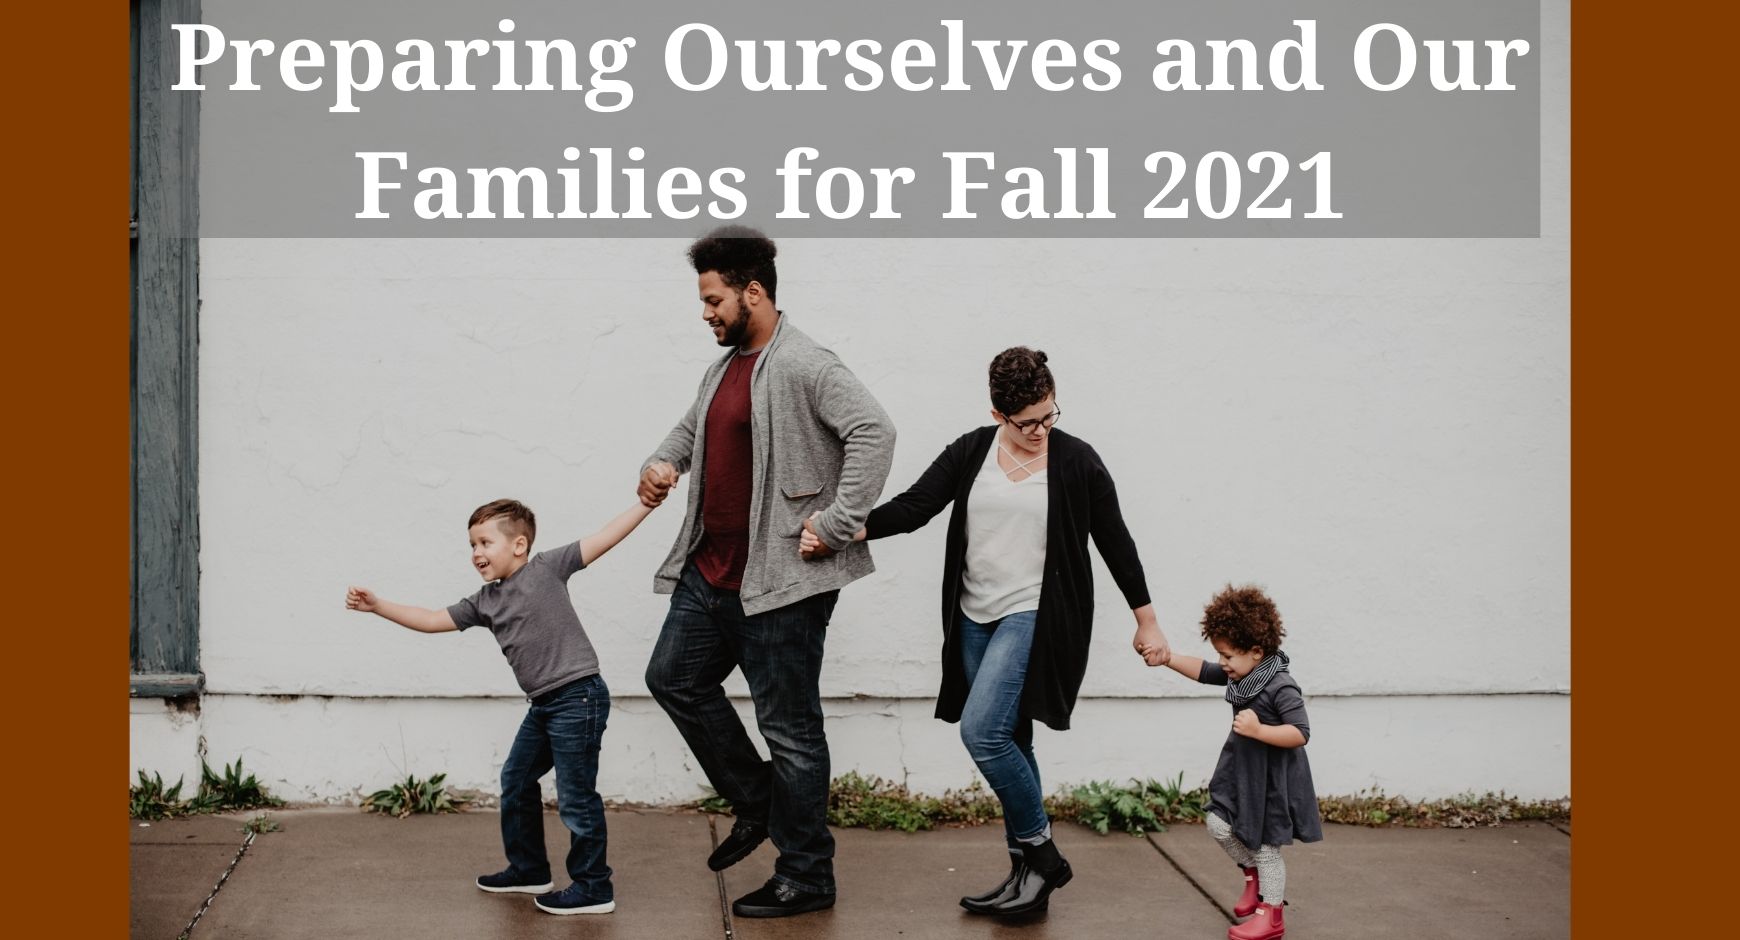 A family of four, with two parents and two children, going for a walk pictured under text that reads "Preparing Ourselves and Our Children for Fall 2021"